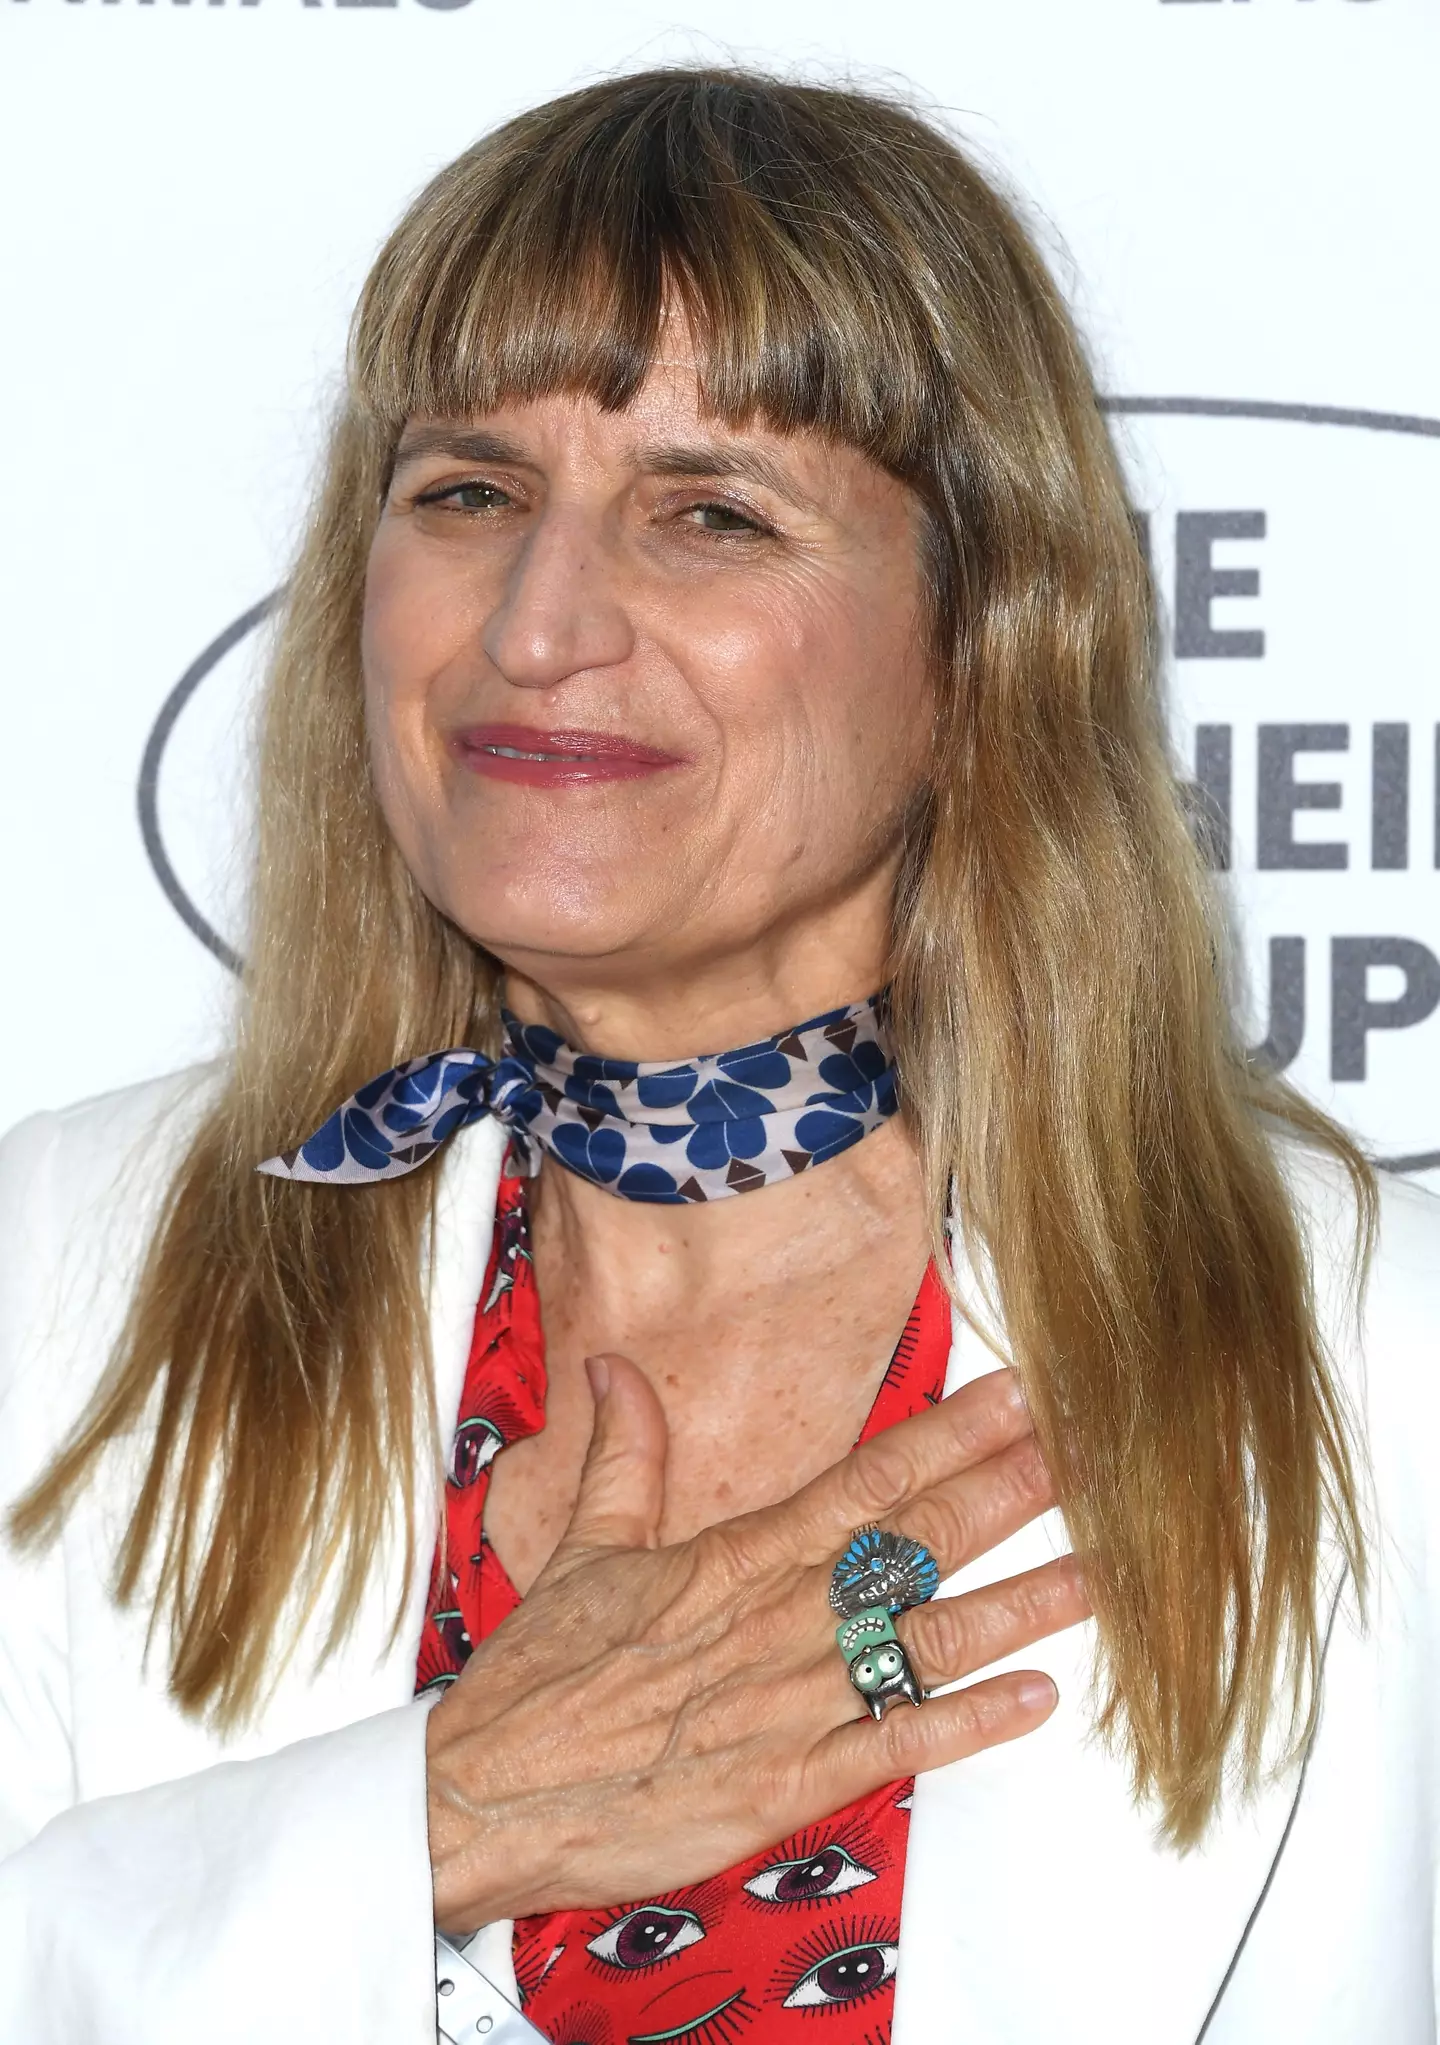 Catherine Hardwicke says she was paid just $3 for directing the film.